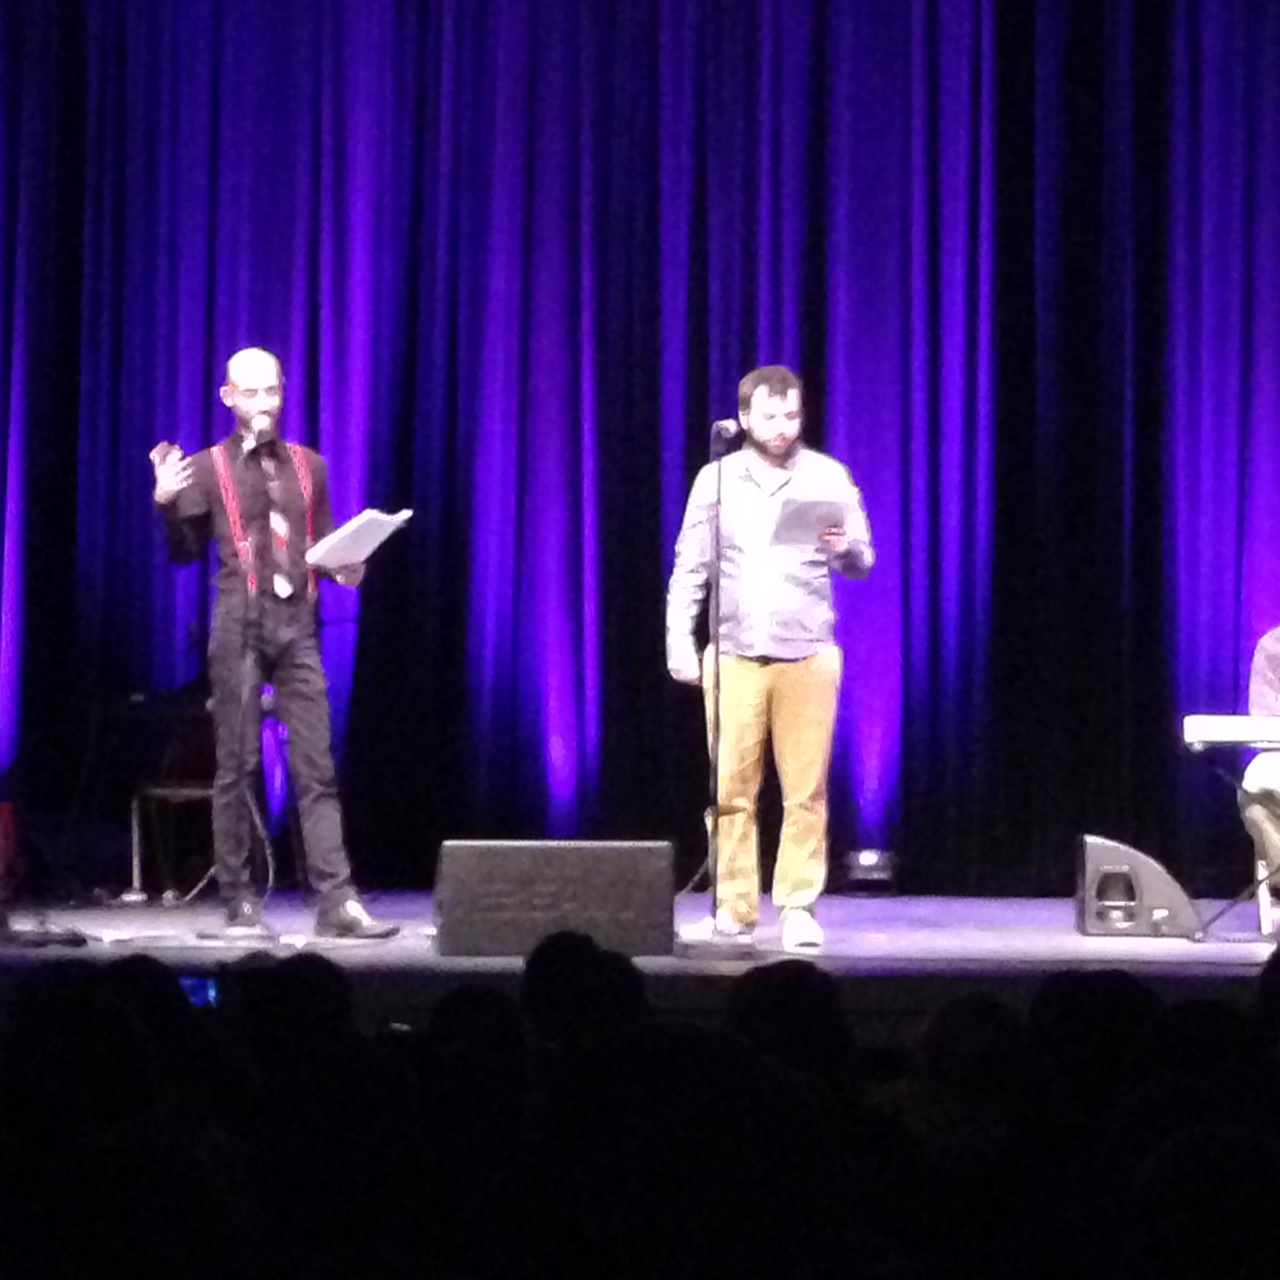 Cecil Baldwin and Joseph Fink on stage at the Bing Theater